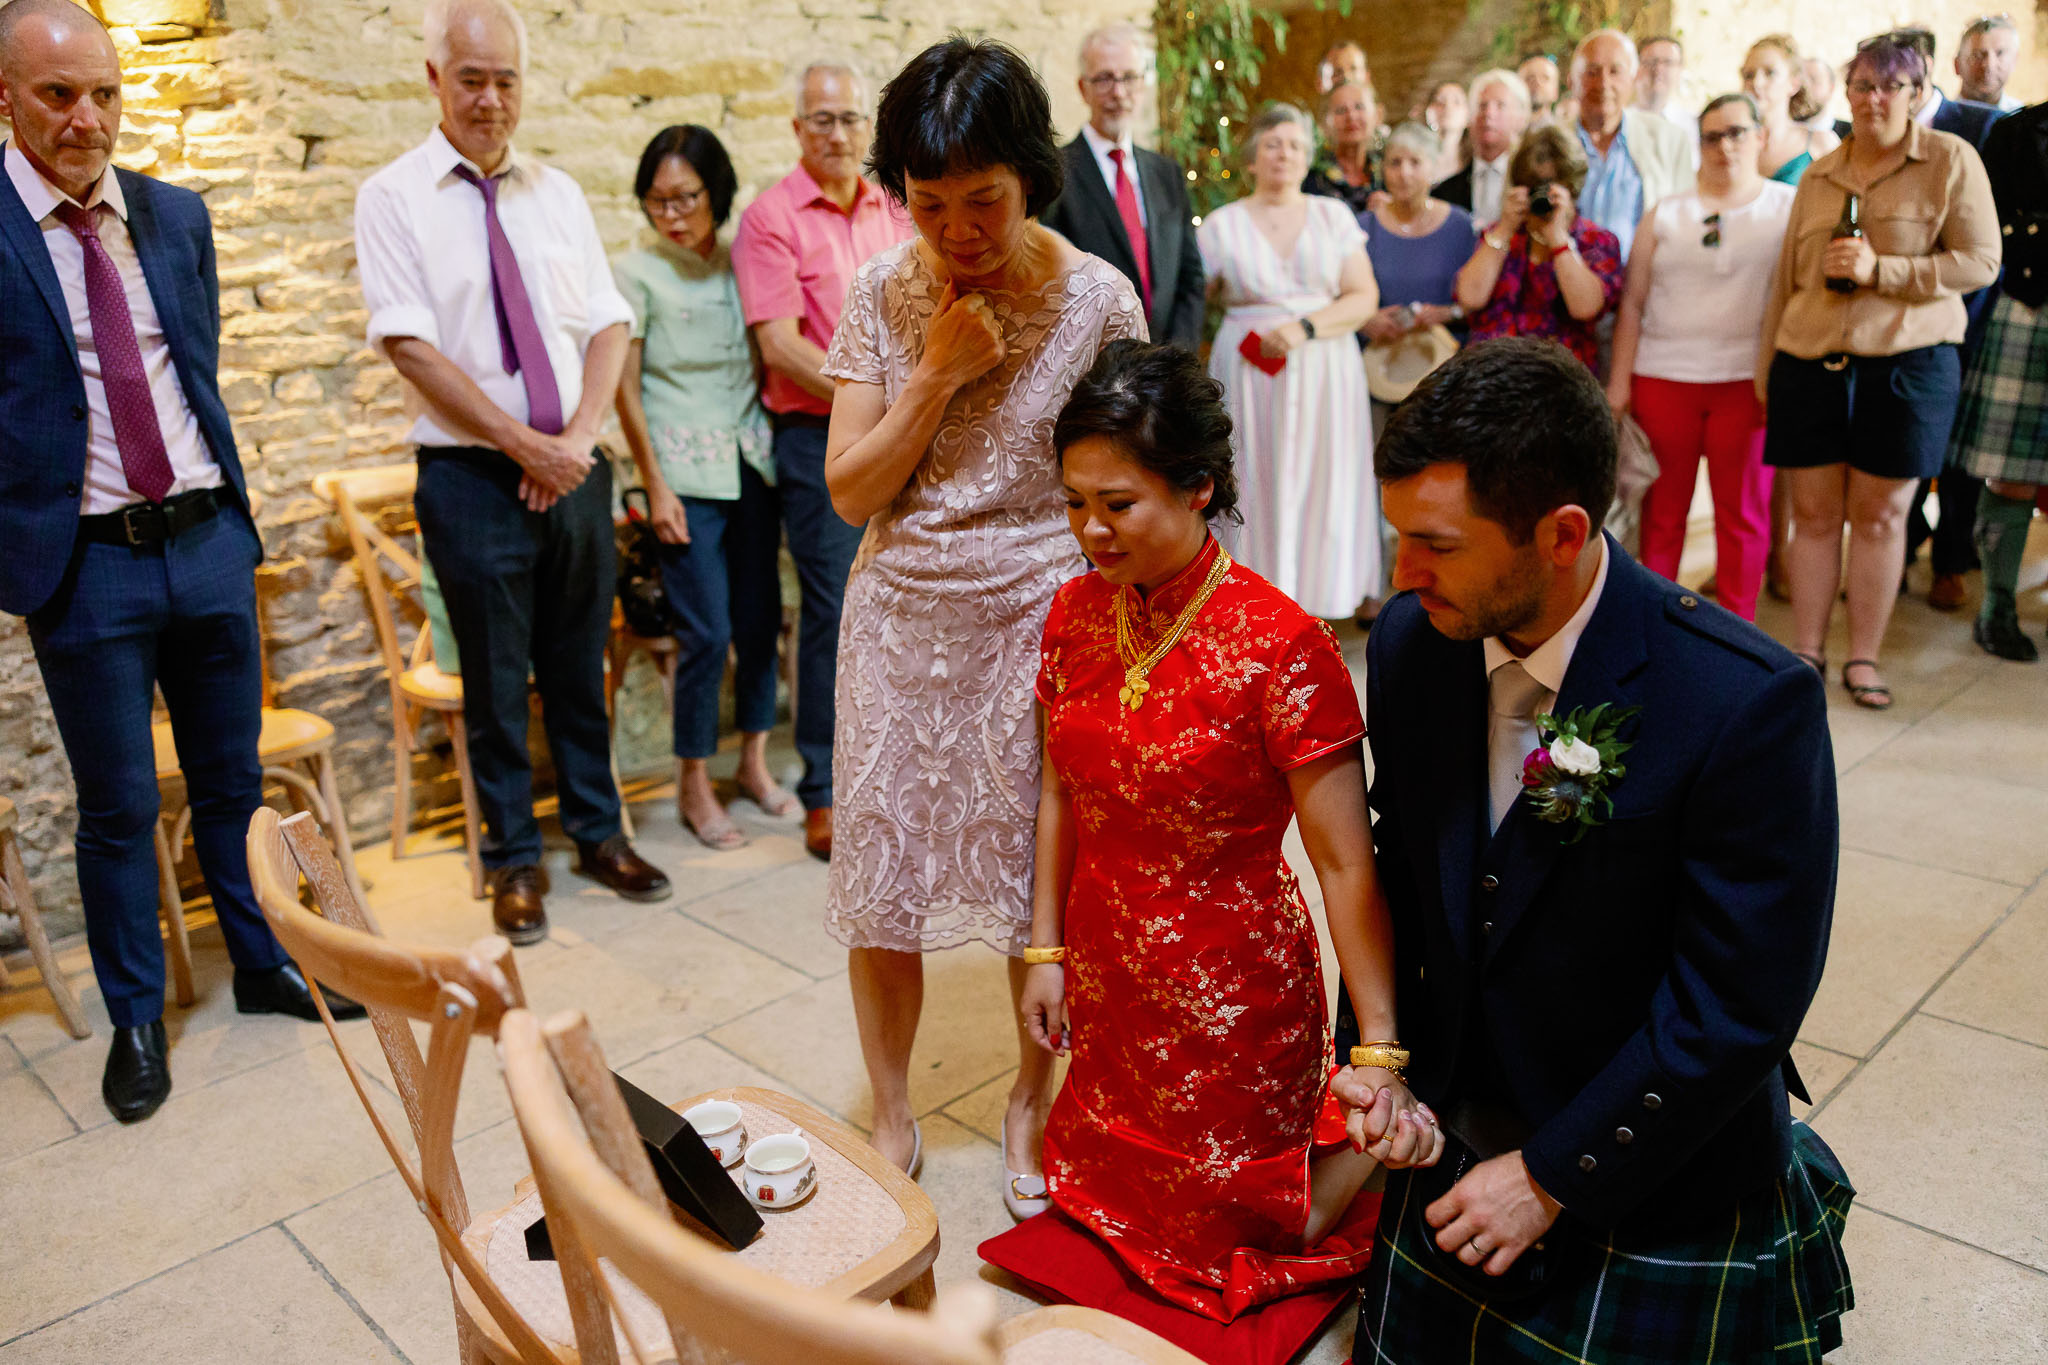 Chinese Tea Ceremony at a wedding 